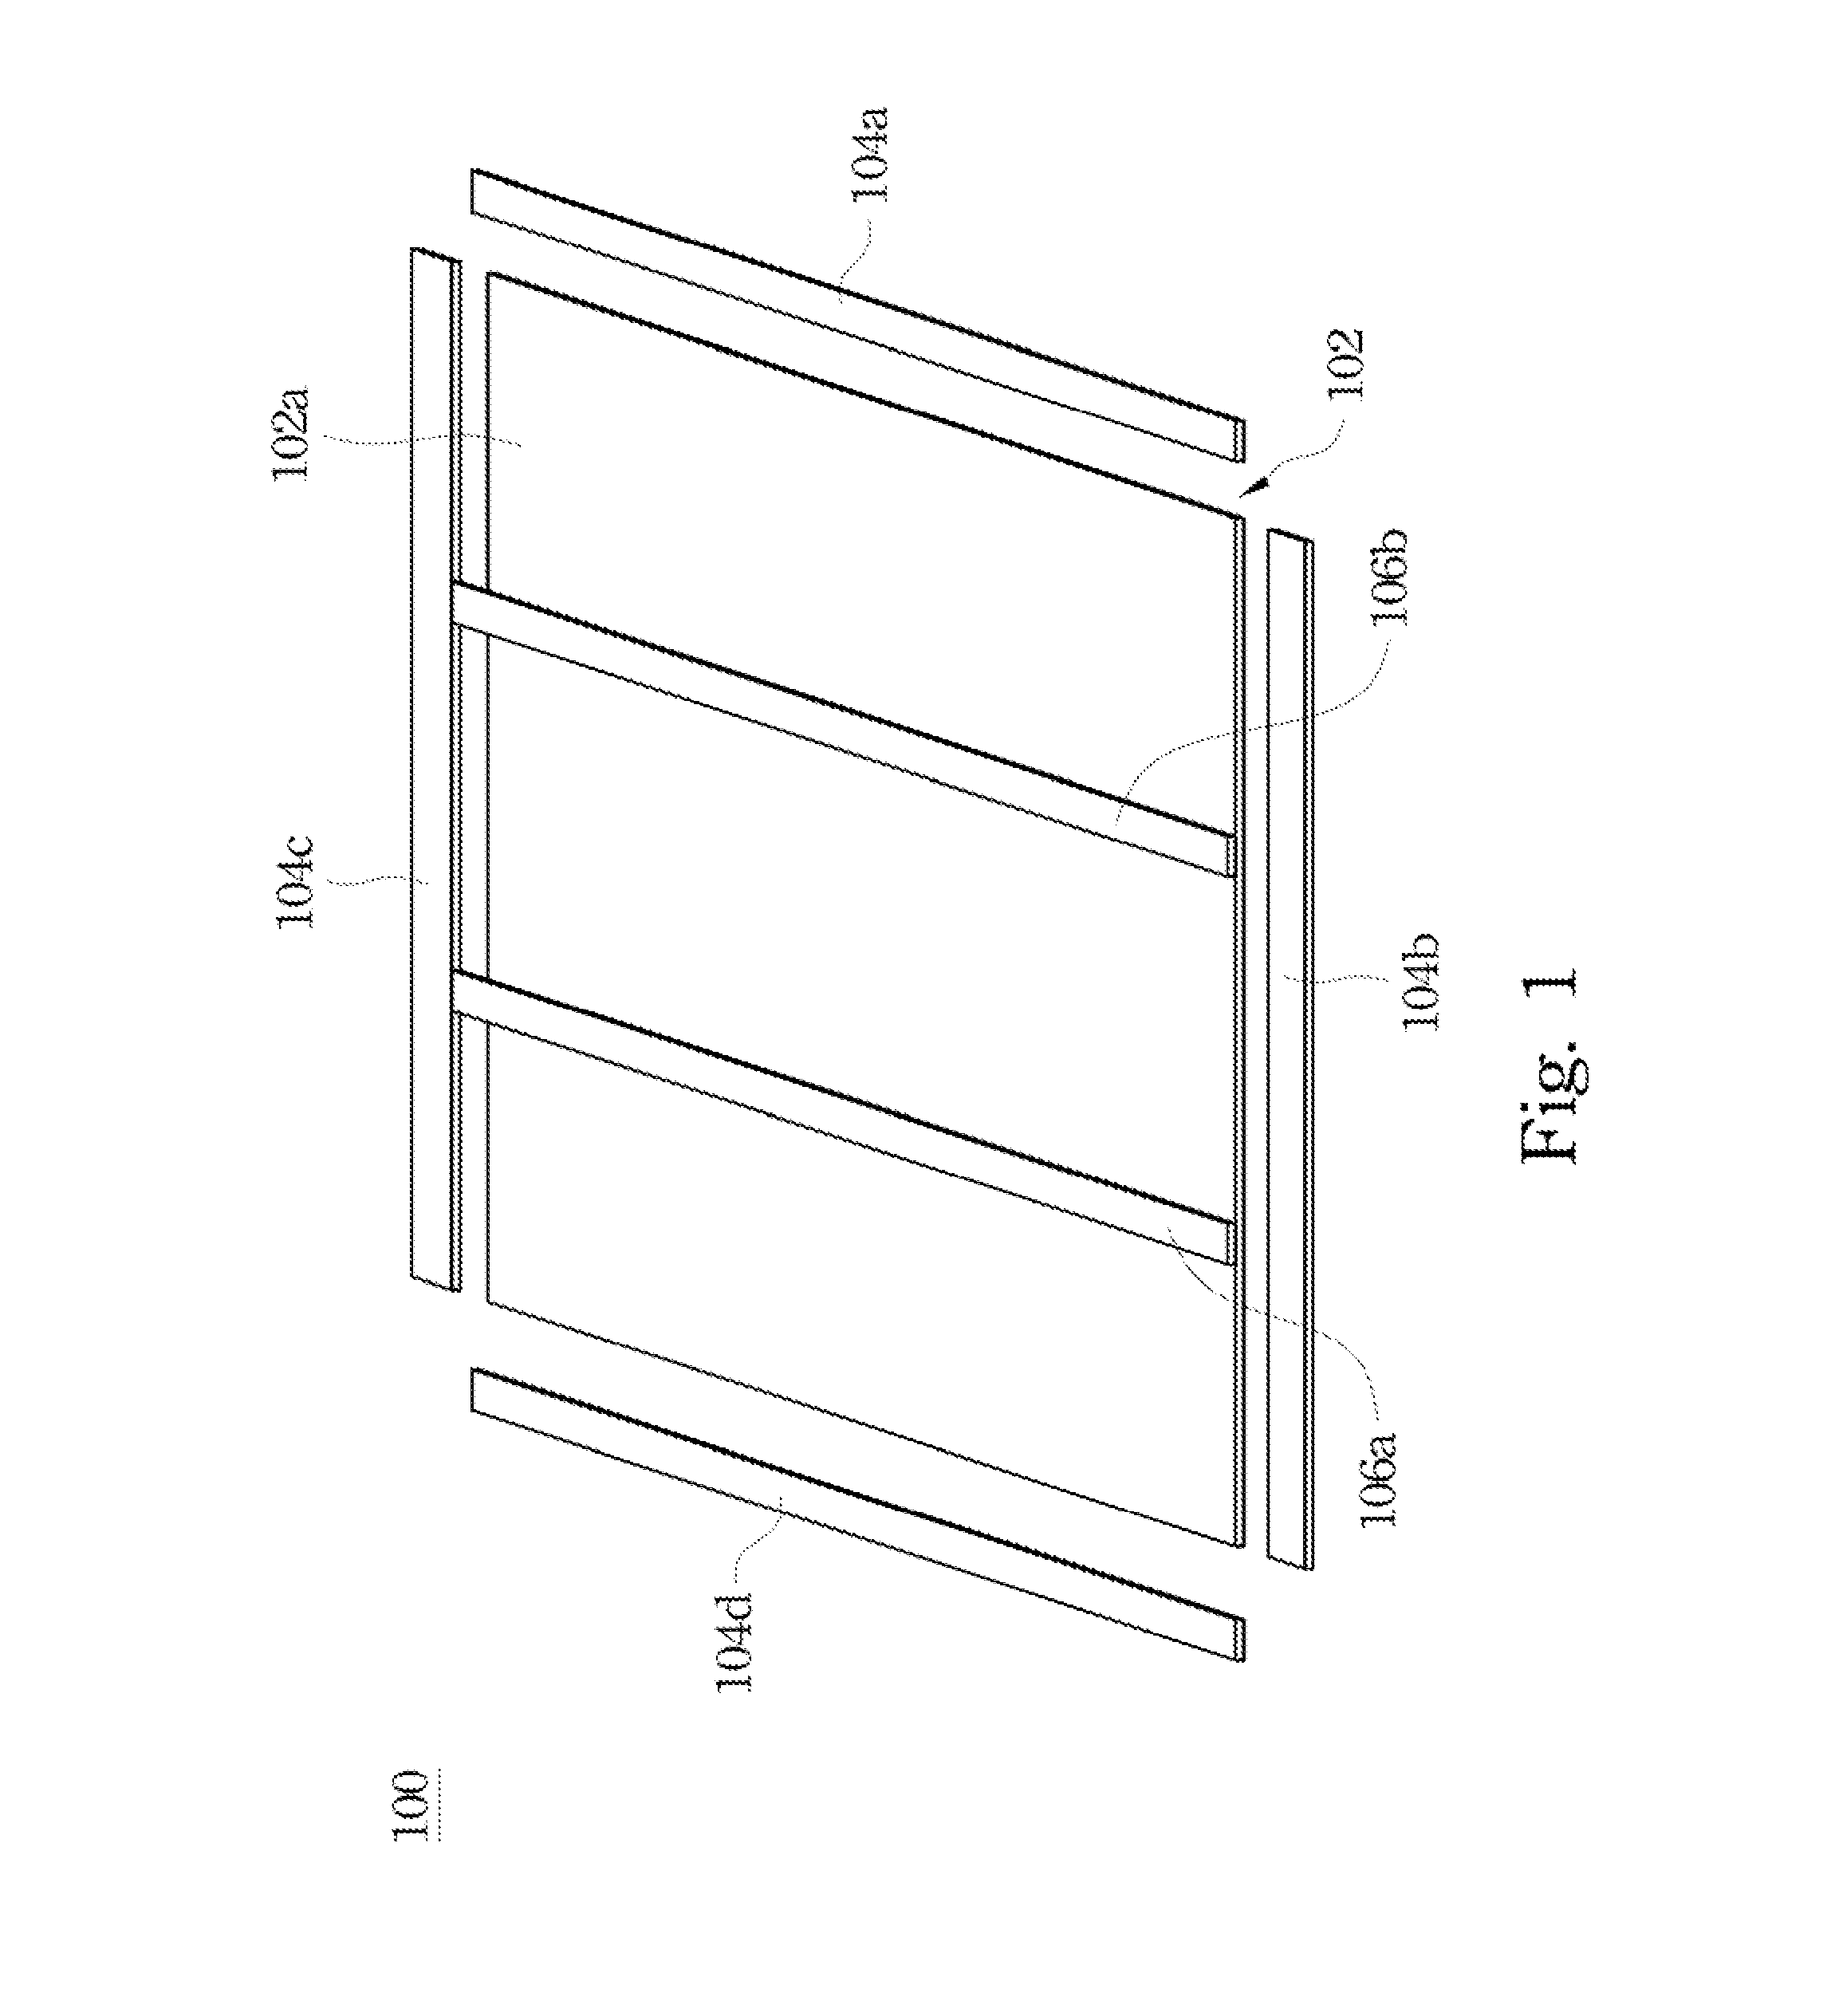 Photovoltaic module with composite materials